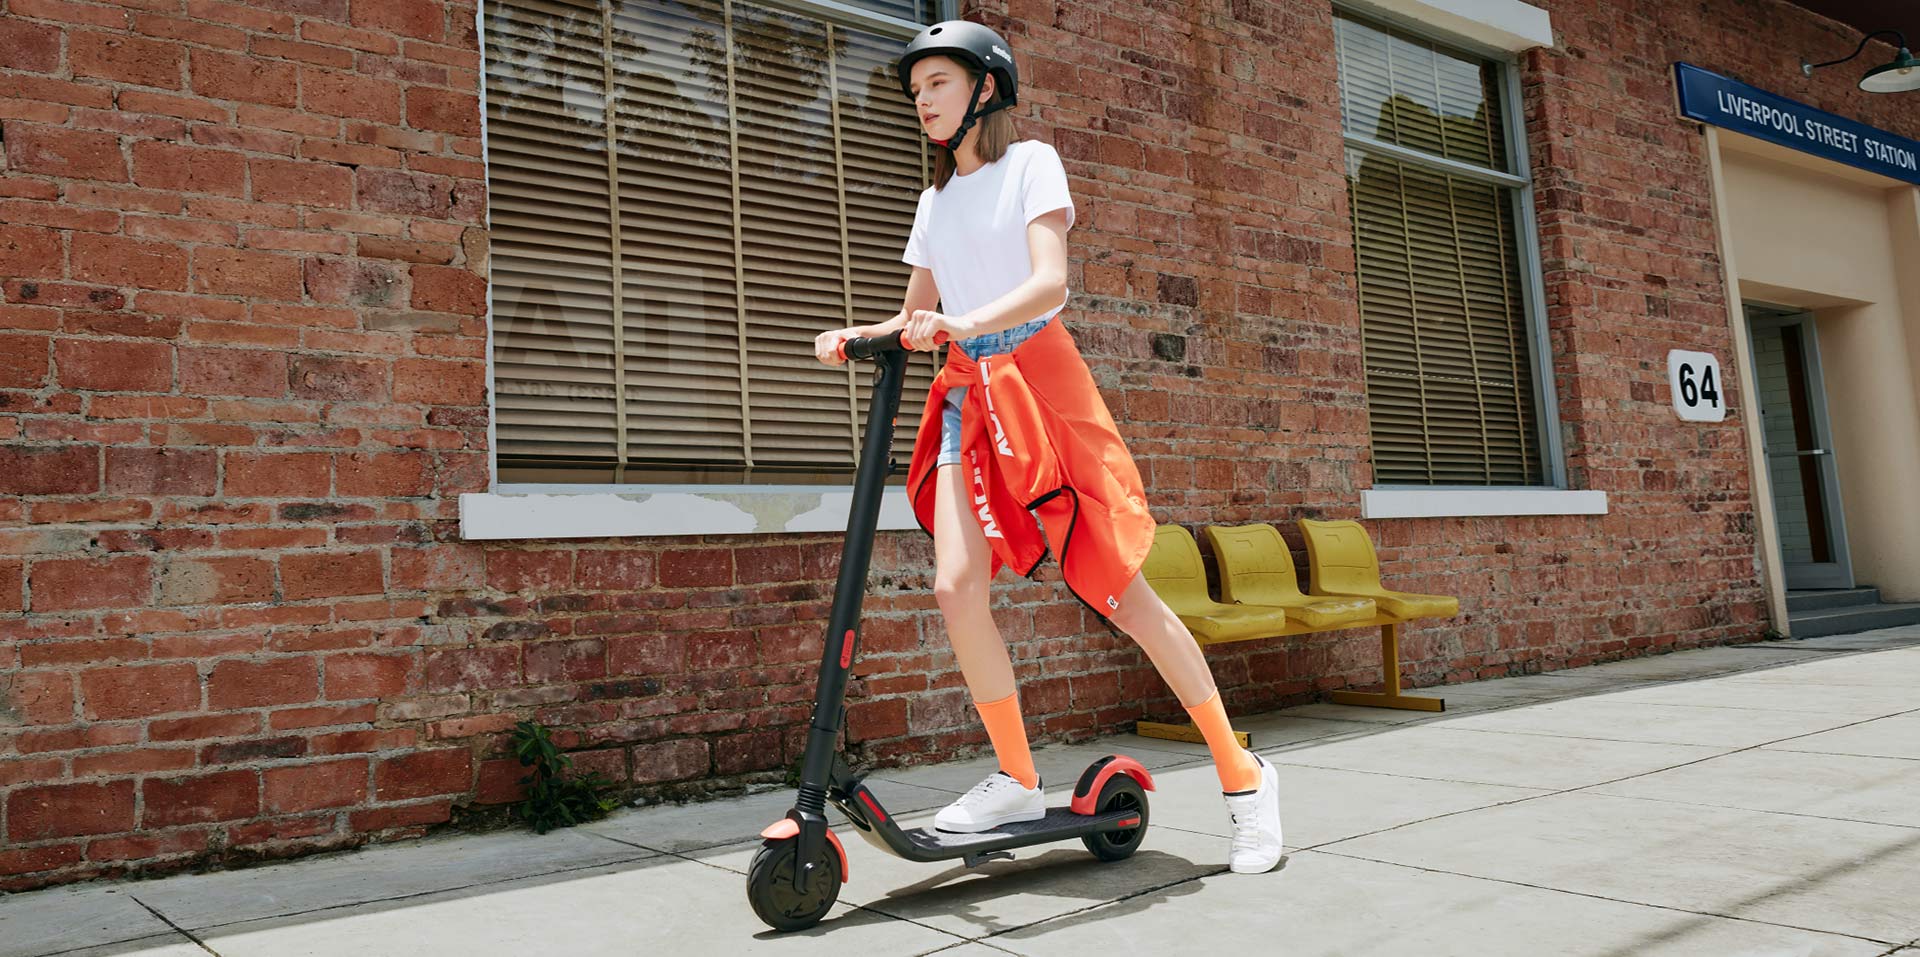 Ninebot Electric Kick Scooter E2/E2 Plus/ES1L, Power by 250W & 300W Motor,  12.4-15.5 Mi & 12.4-15.5 MPH, 8.1-Inch Inner Hollow Tires, Cruise Control 